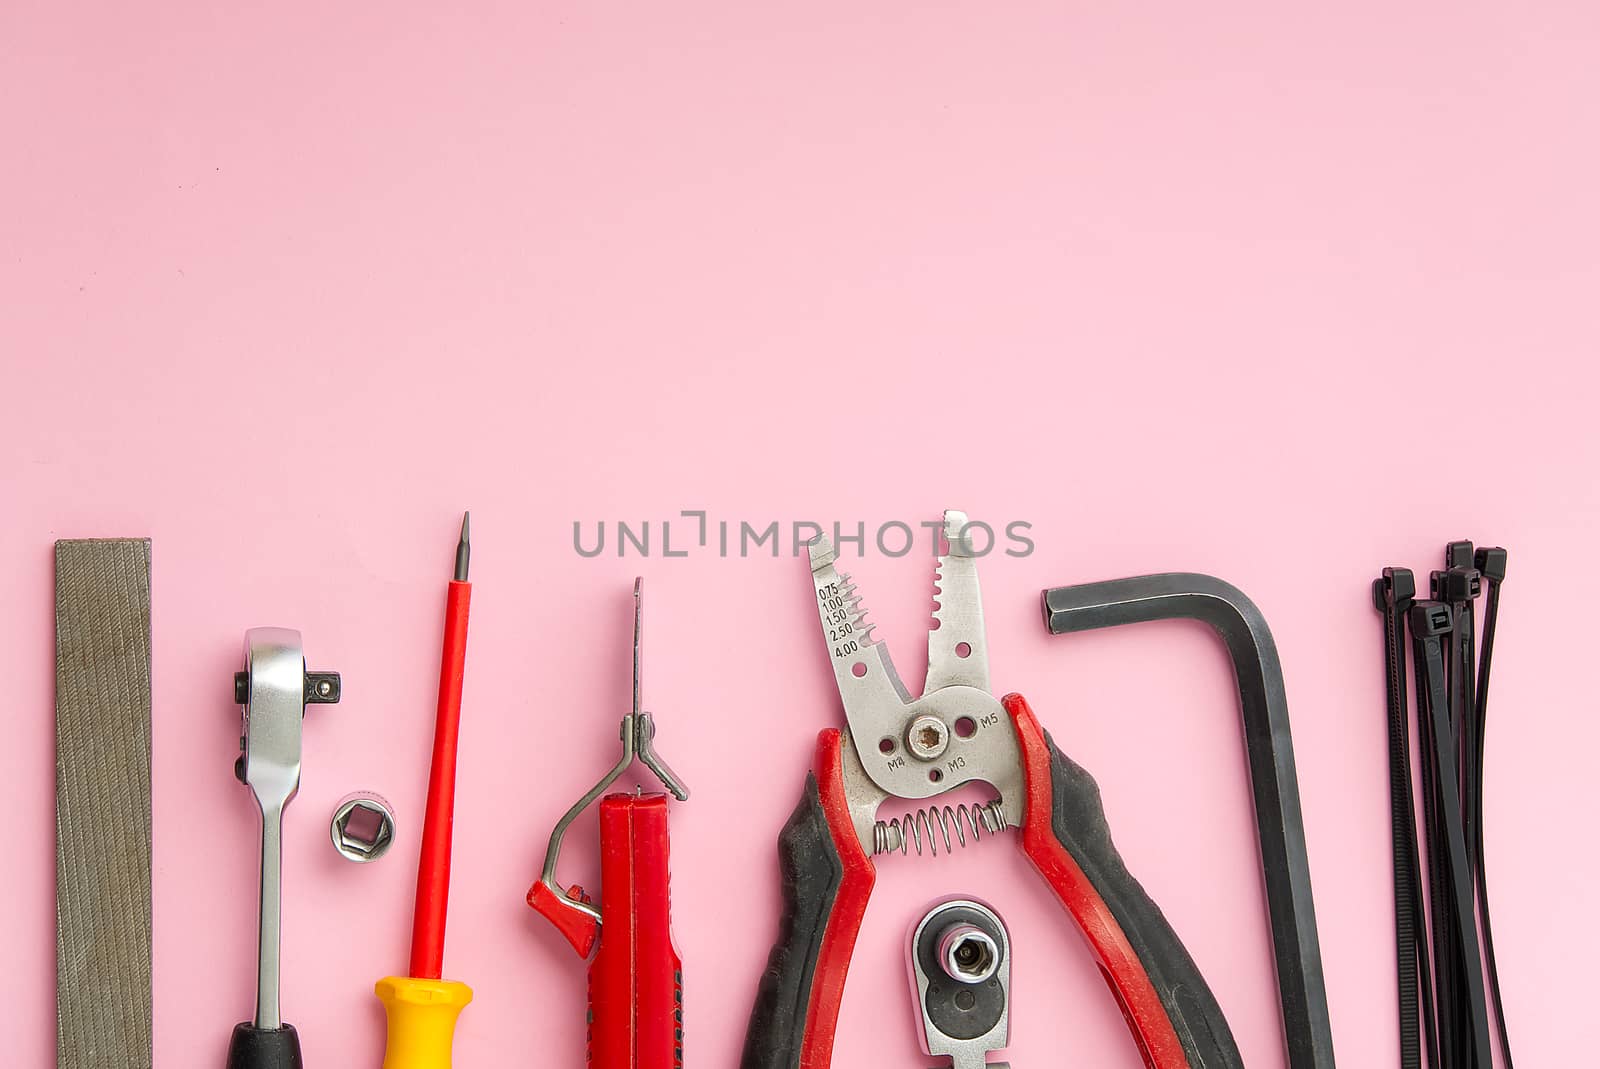 Home maintenance, service, diy concept. Tools for wood, metal and other construction work. Top view on DIY tools. home repairs. on pink background